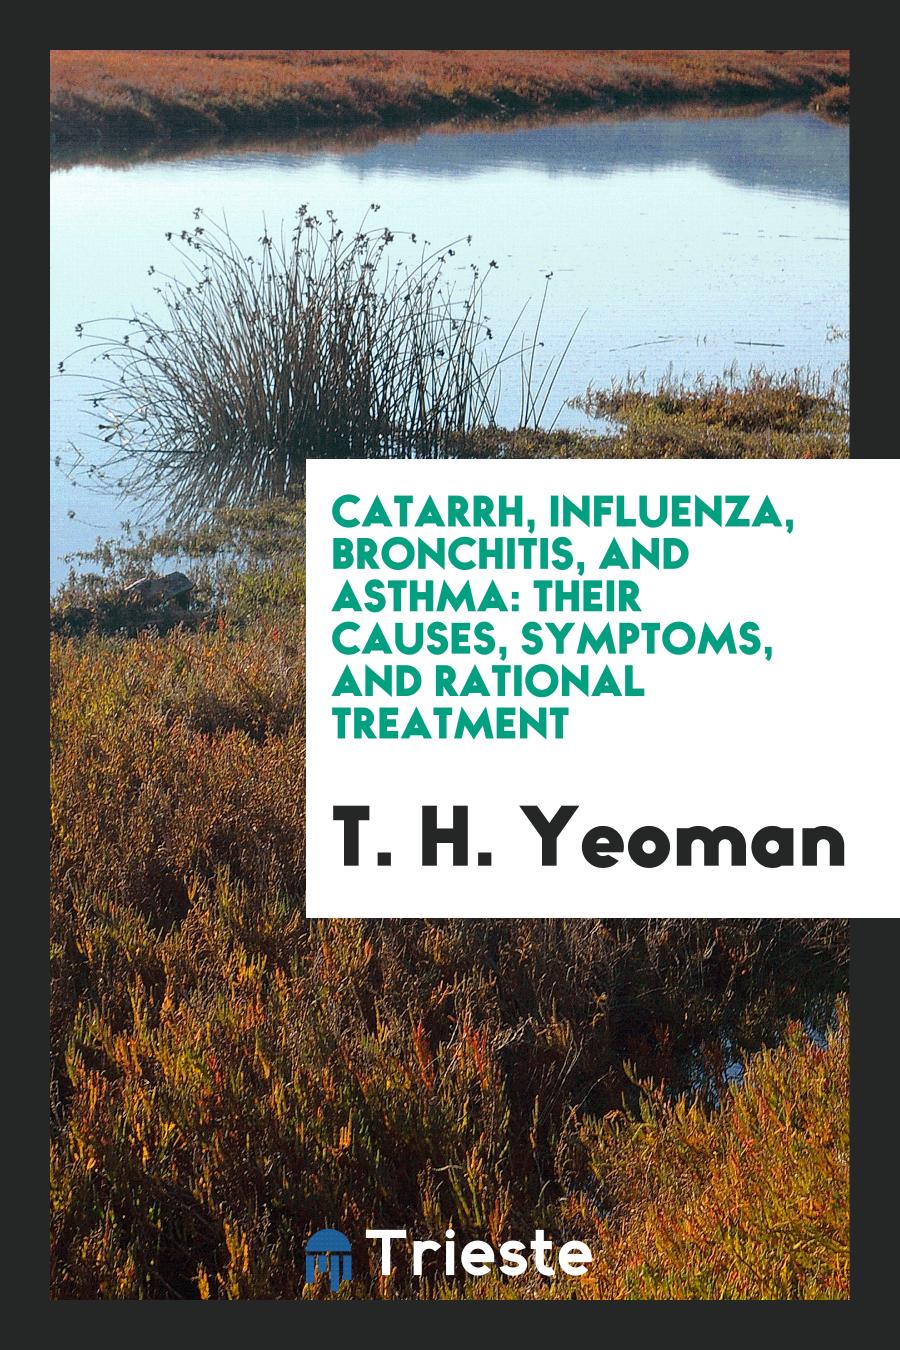 Catarrh, Influenza, Bronchitis, and Asthma: Their Causes, Symptoms, and Rational Treatment